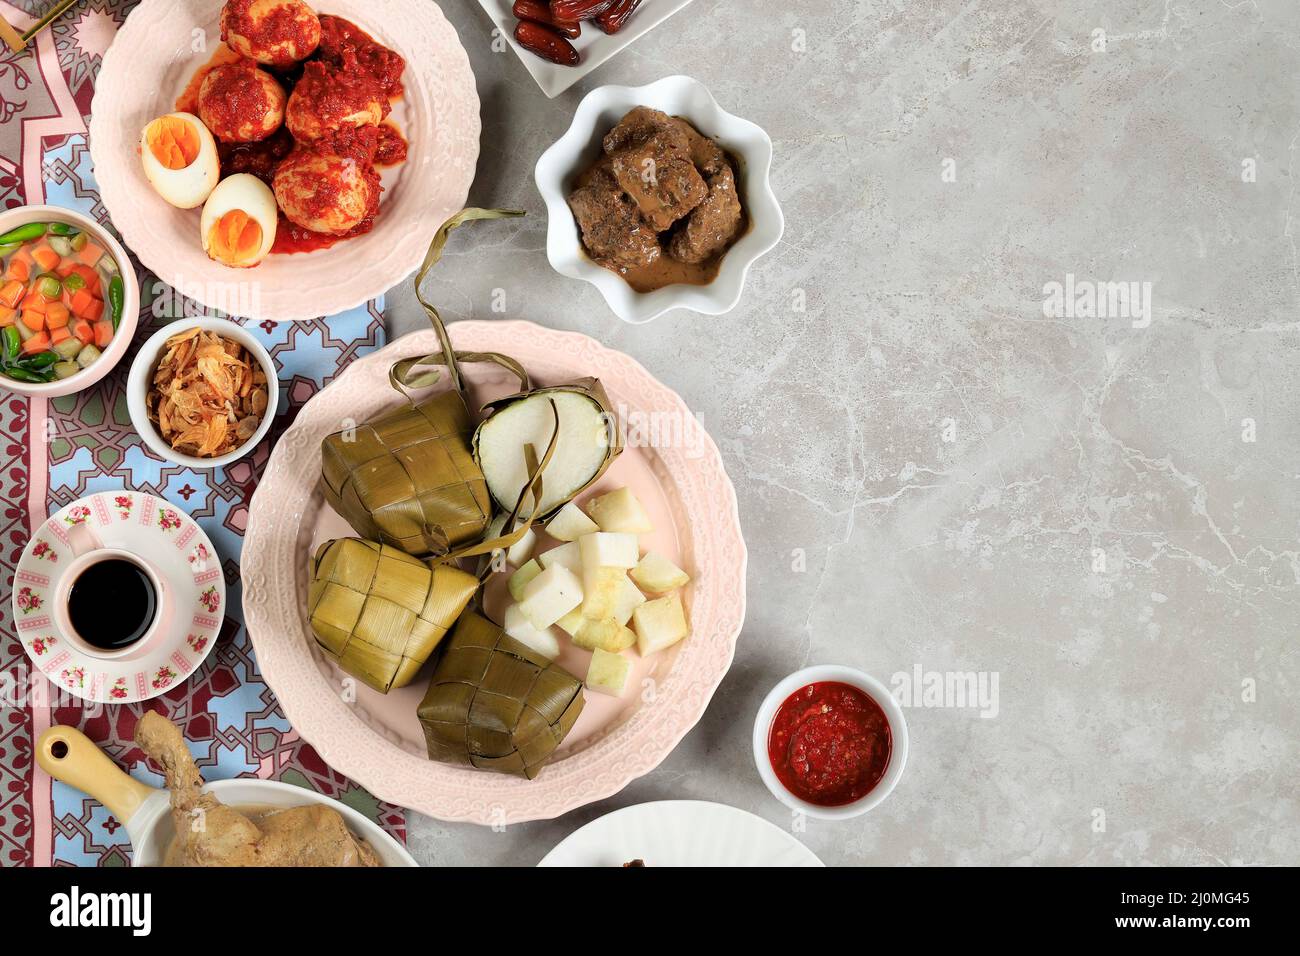 Ketupat Lebaran. Traditional Celebratory Dish of Rice Cake or Ketupat with Various Side Dishes, Popular Served During Eid Celebrations. Copy Space for Stock Photo